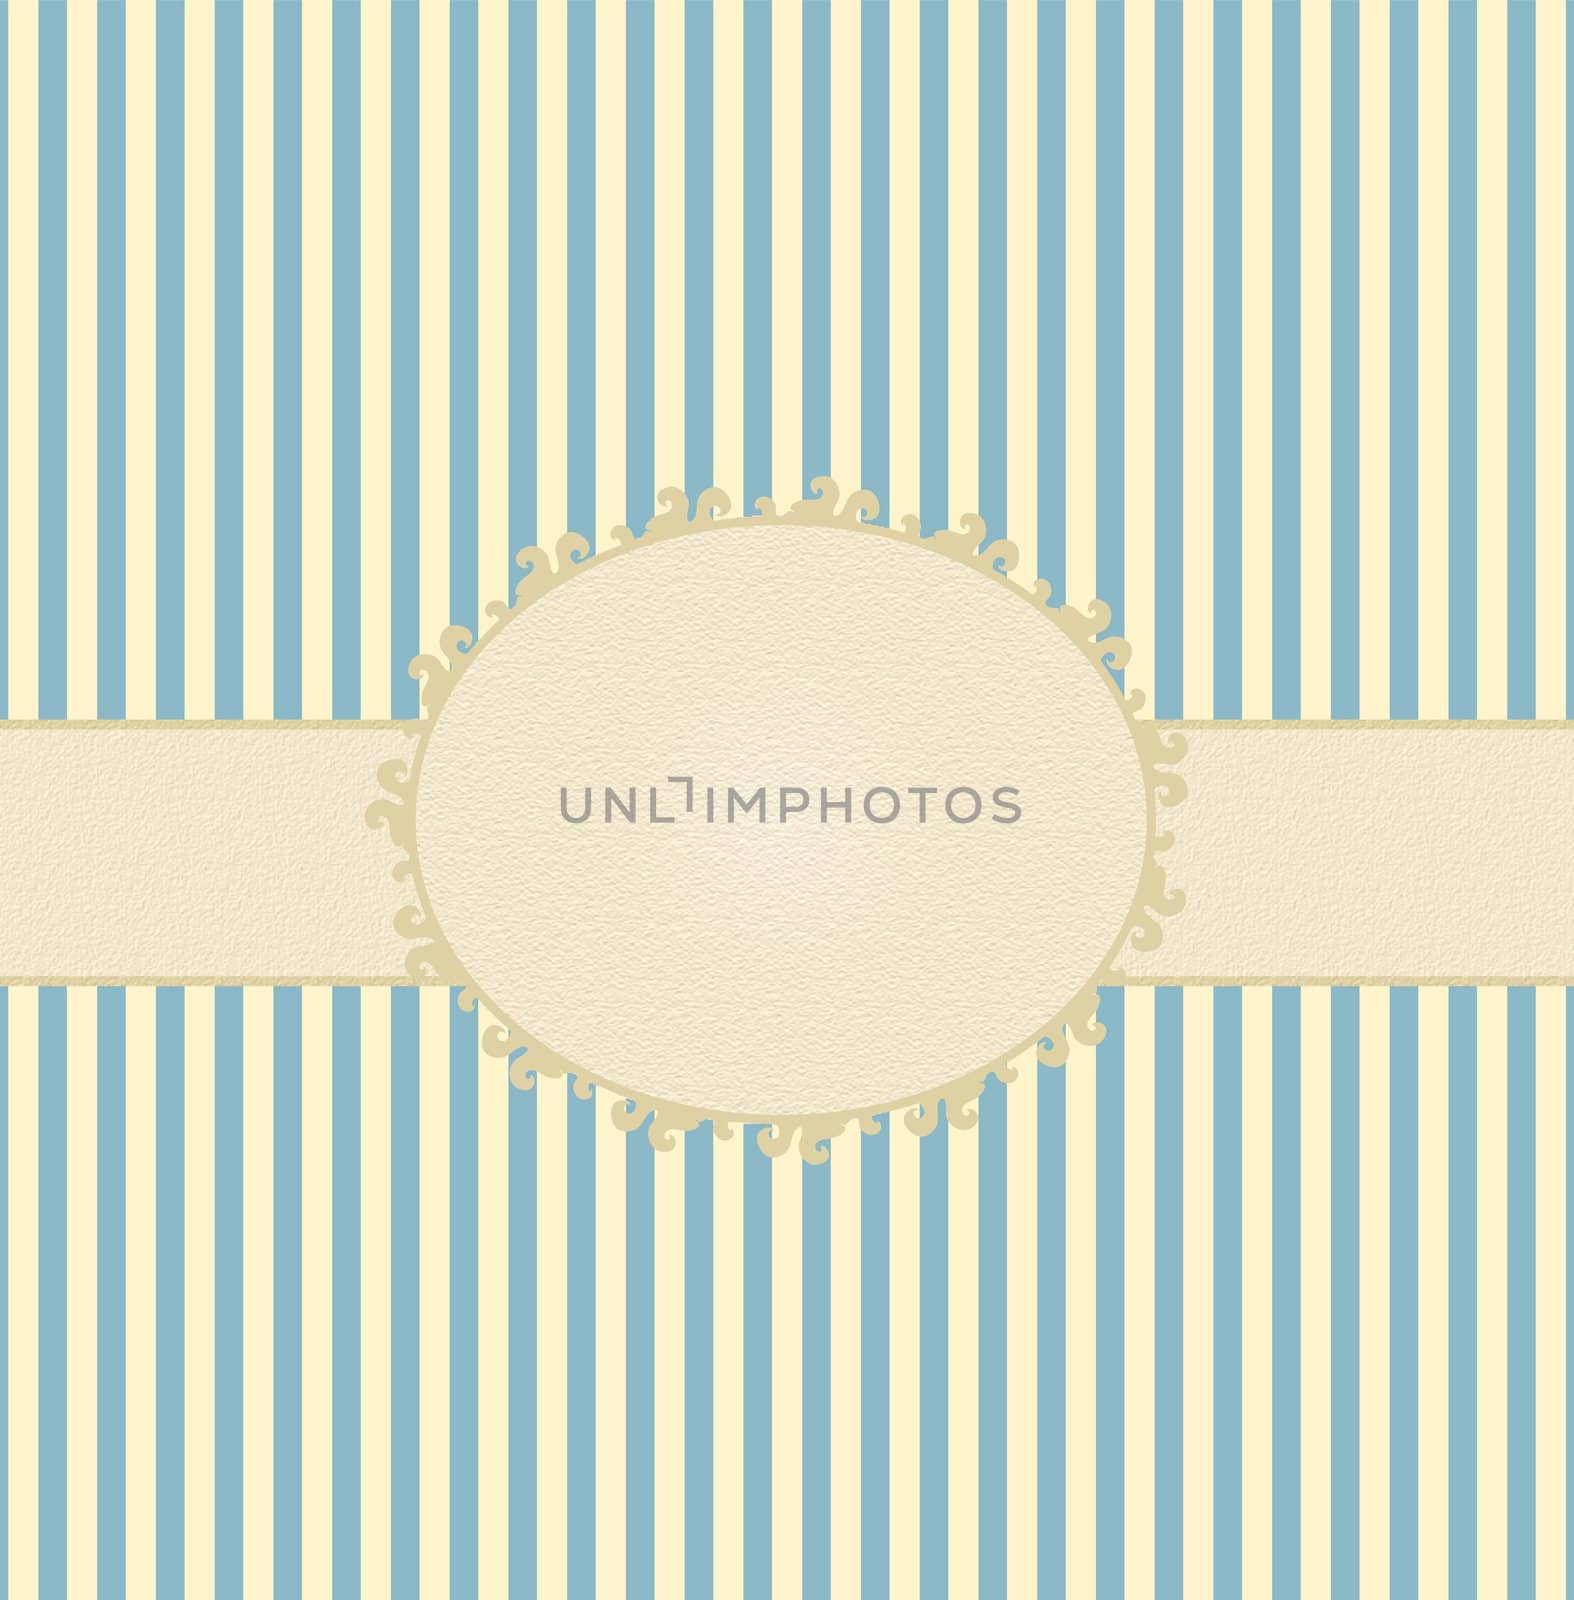 Colorful striped background with label and ribbon